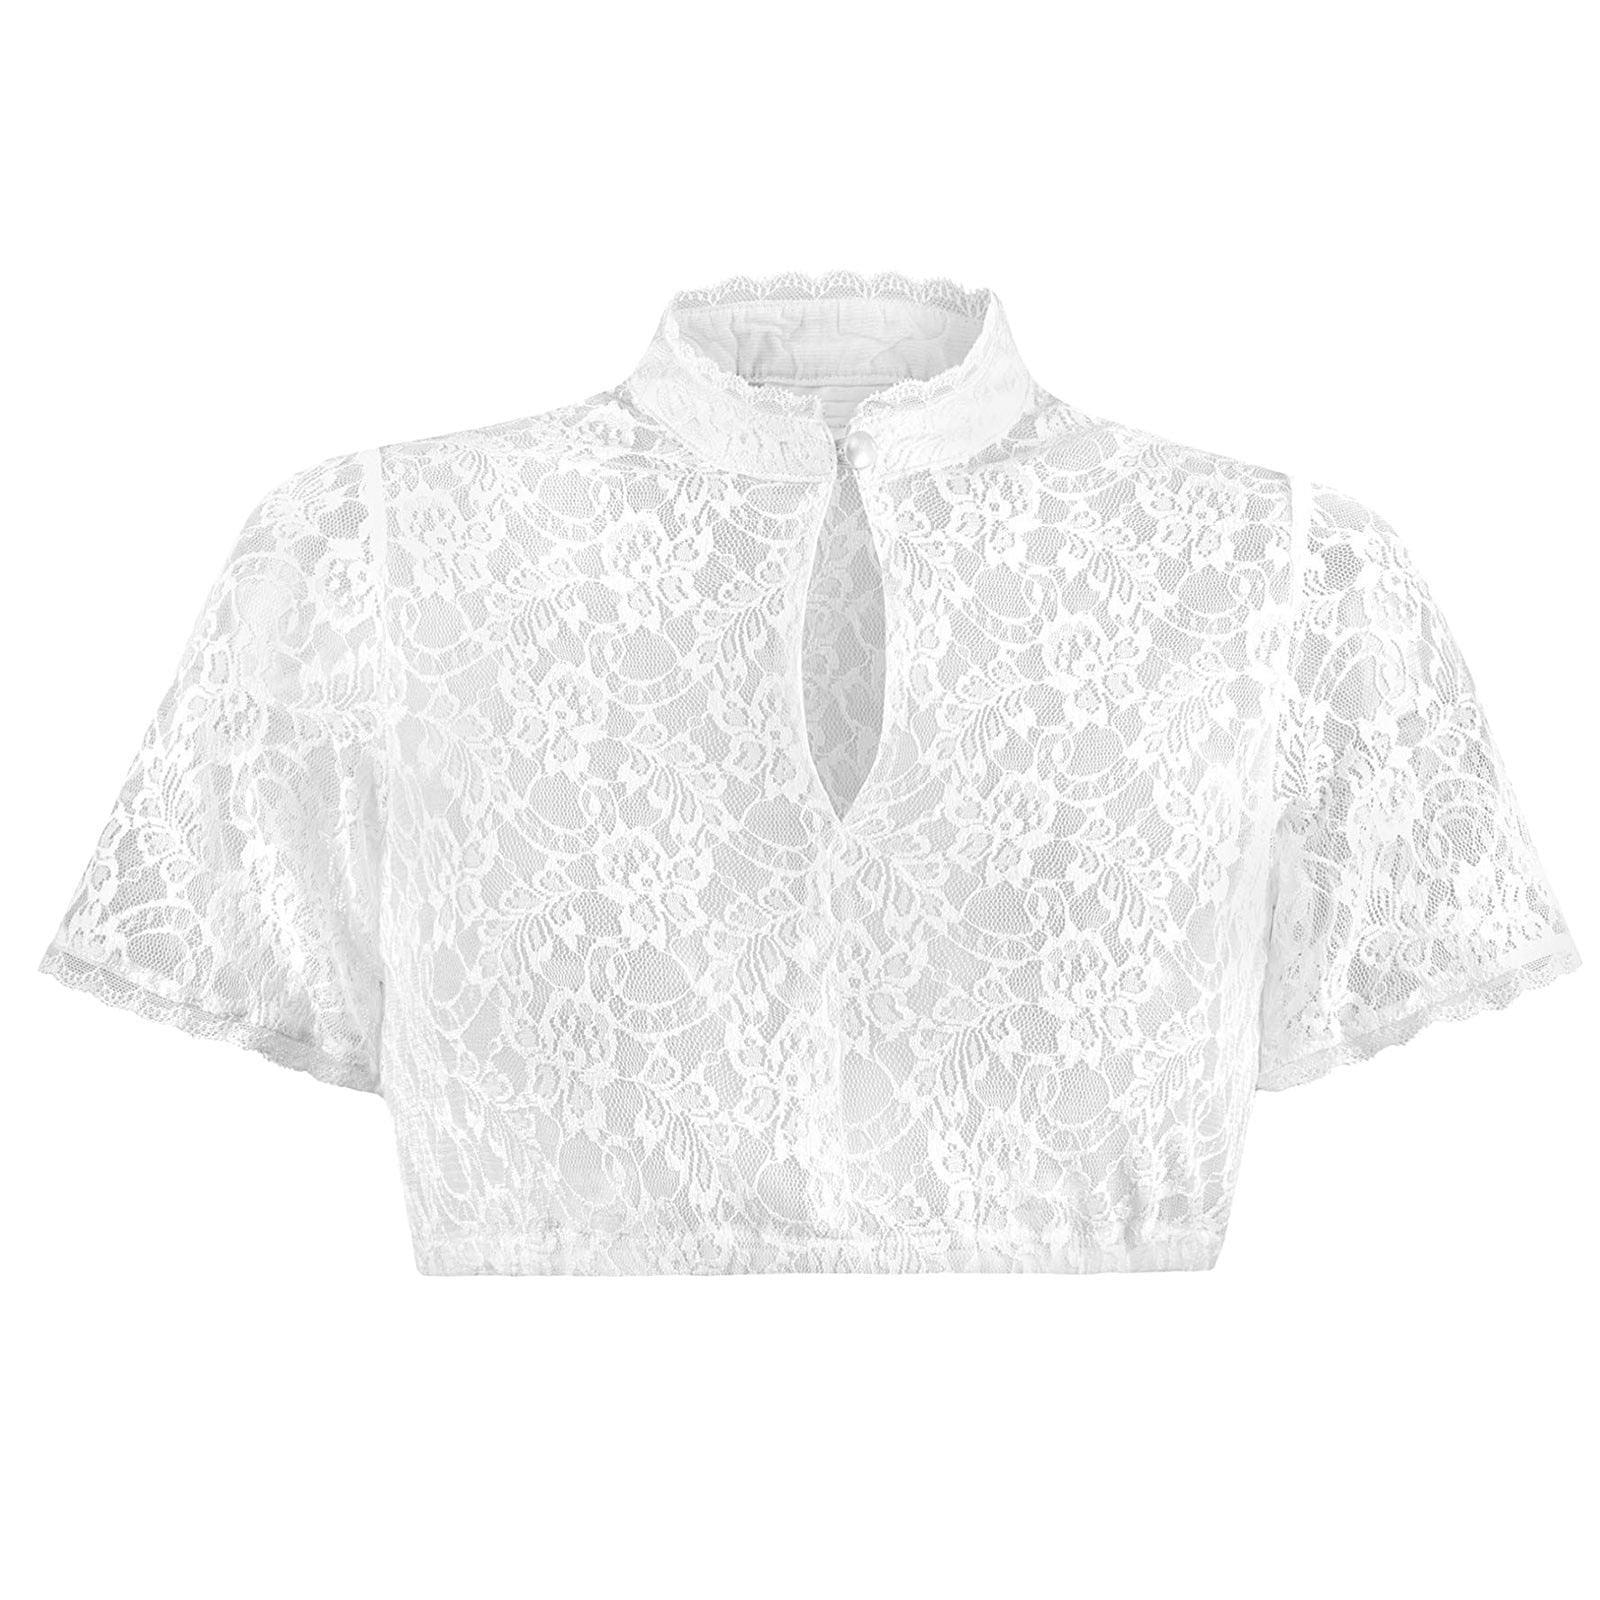 Women's Shirts - Cropped Tops Womens Elegant Lace Crop Top Hollow Out